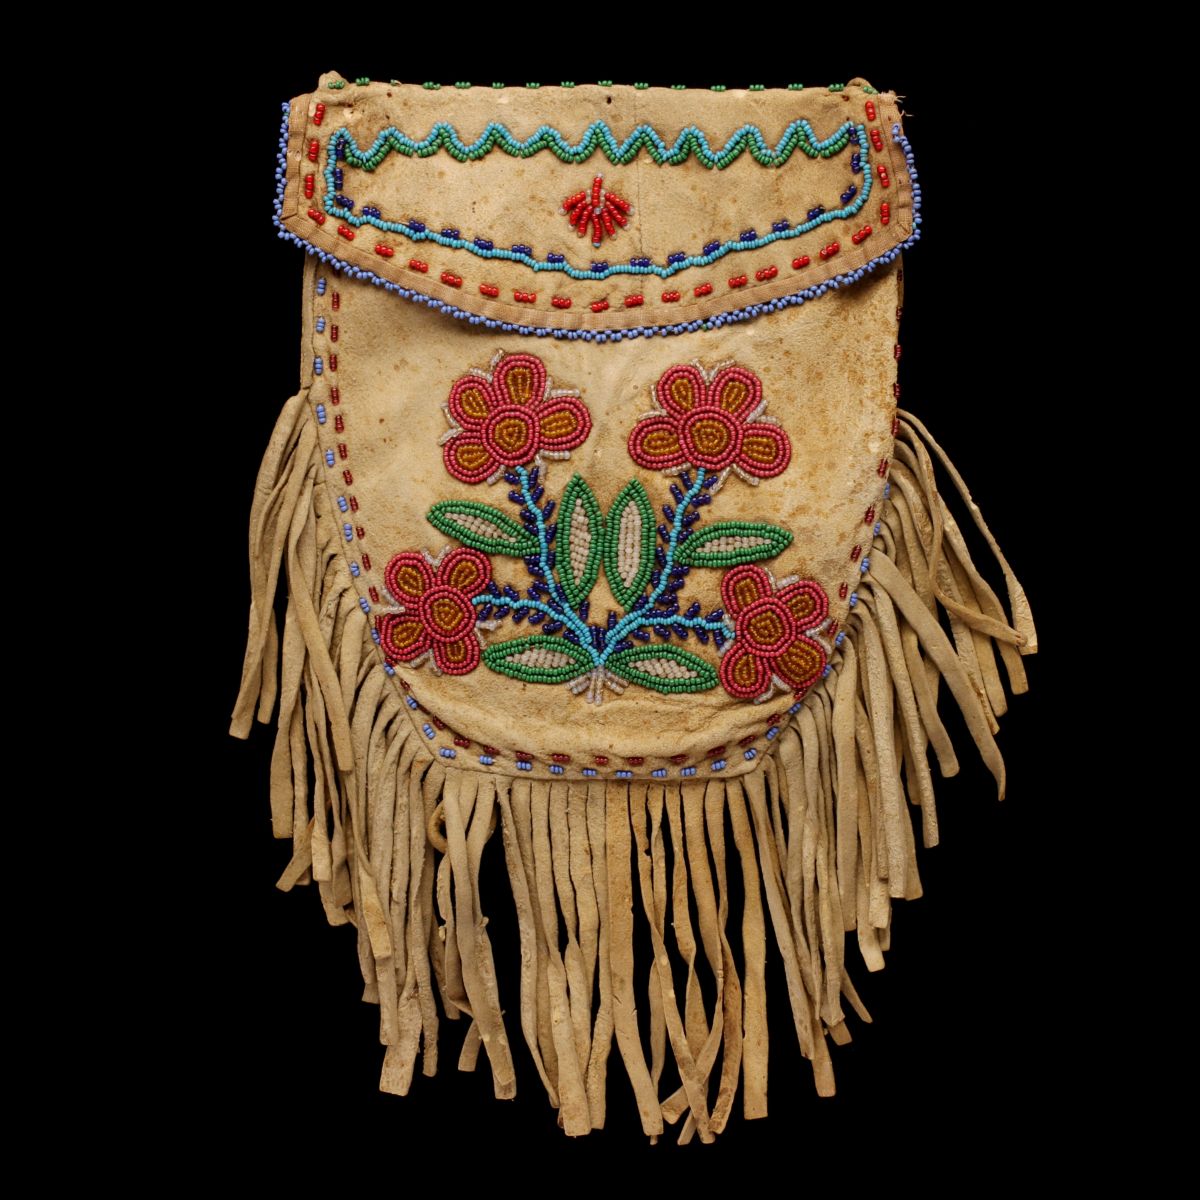 A GREAT LAKES BEADED HIDE POUCH CIRCA 1900